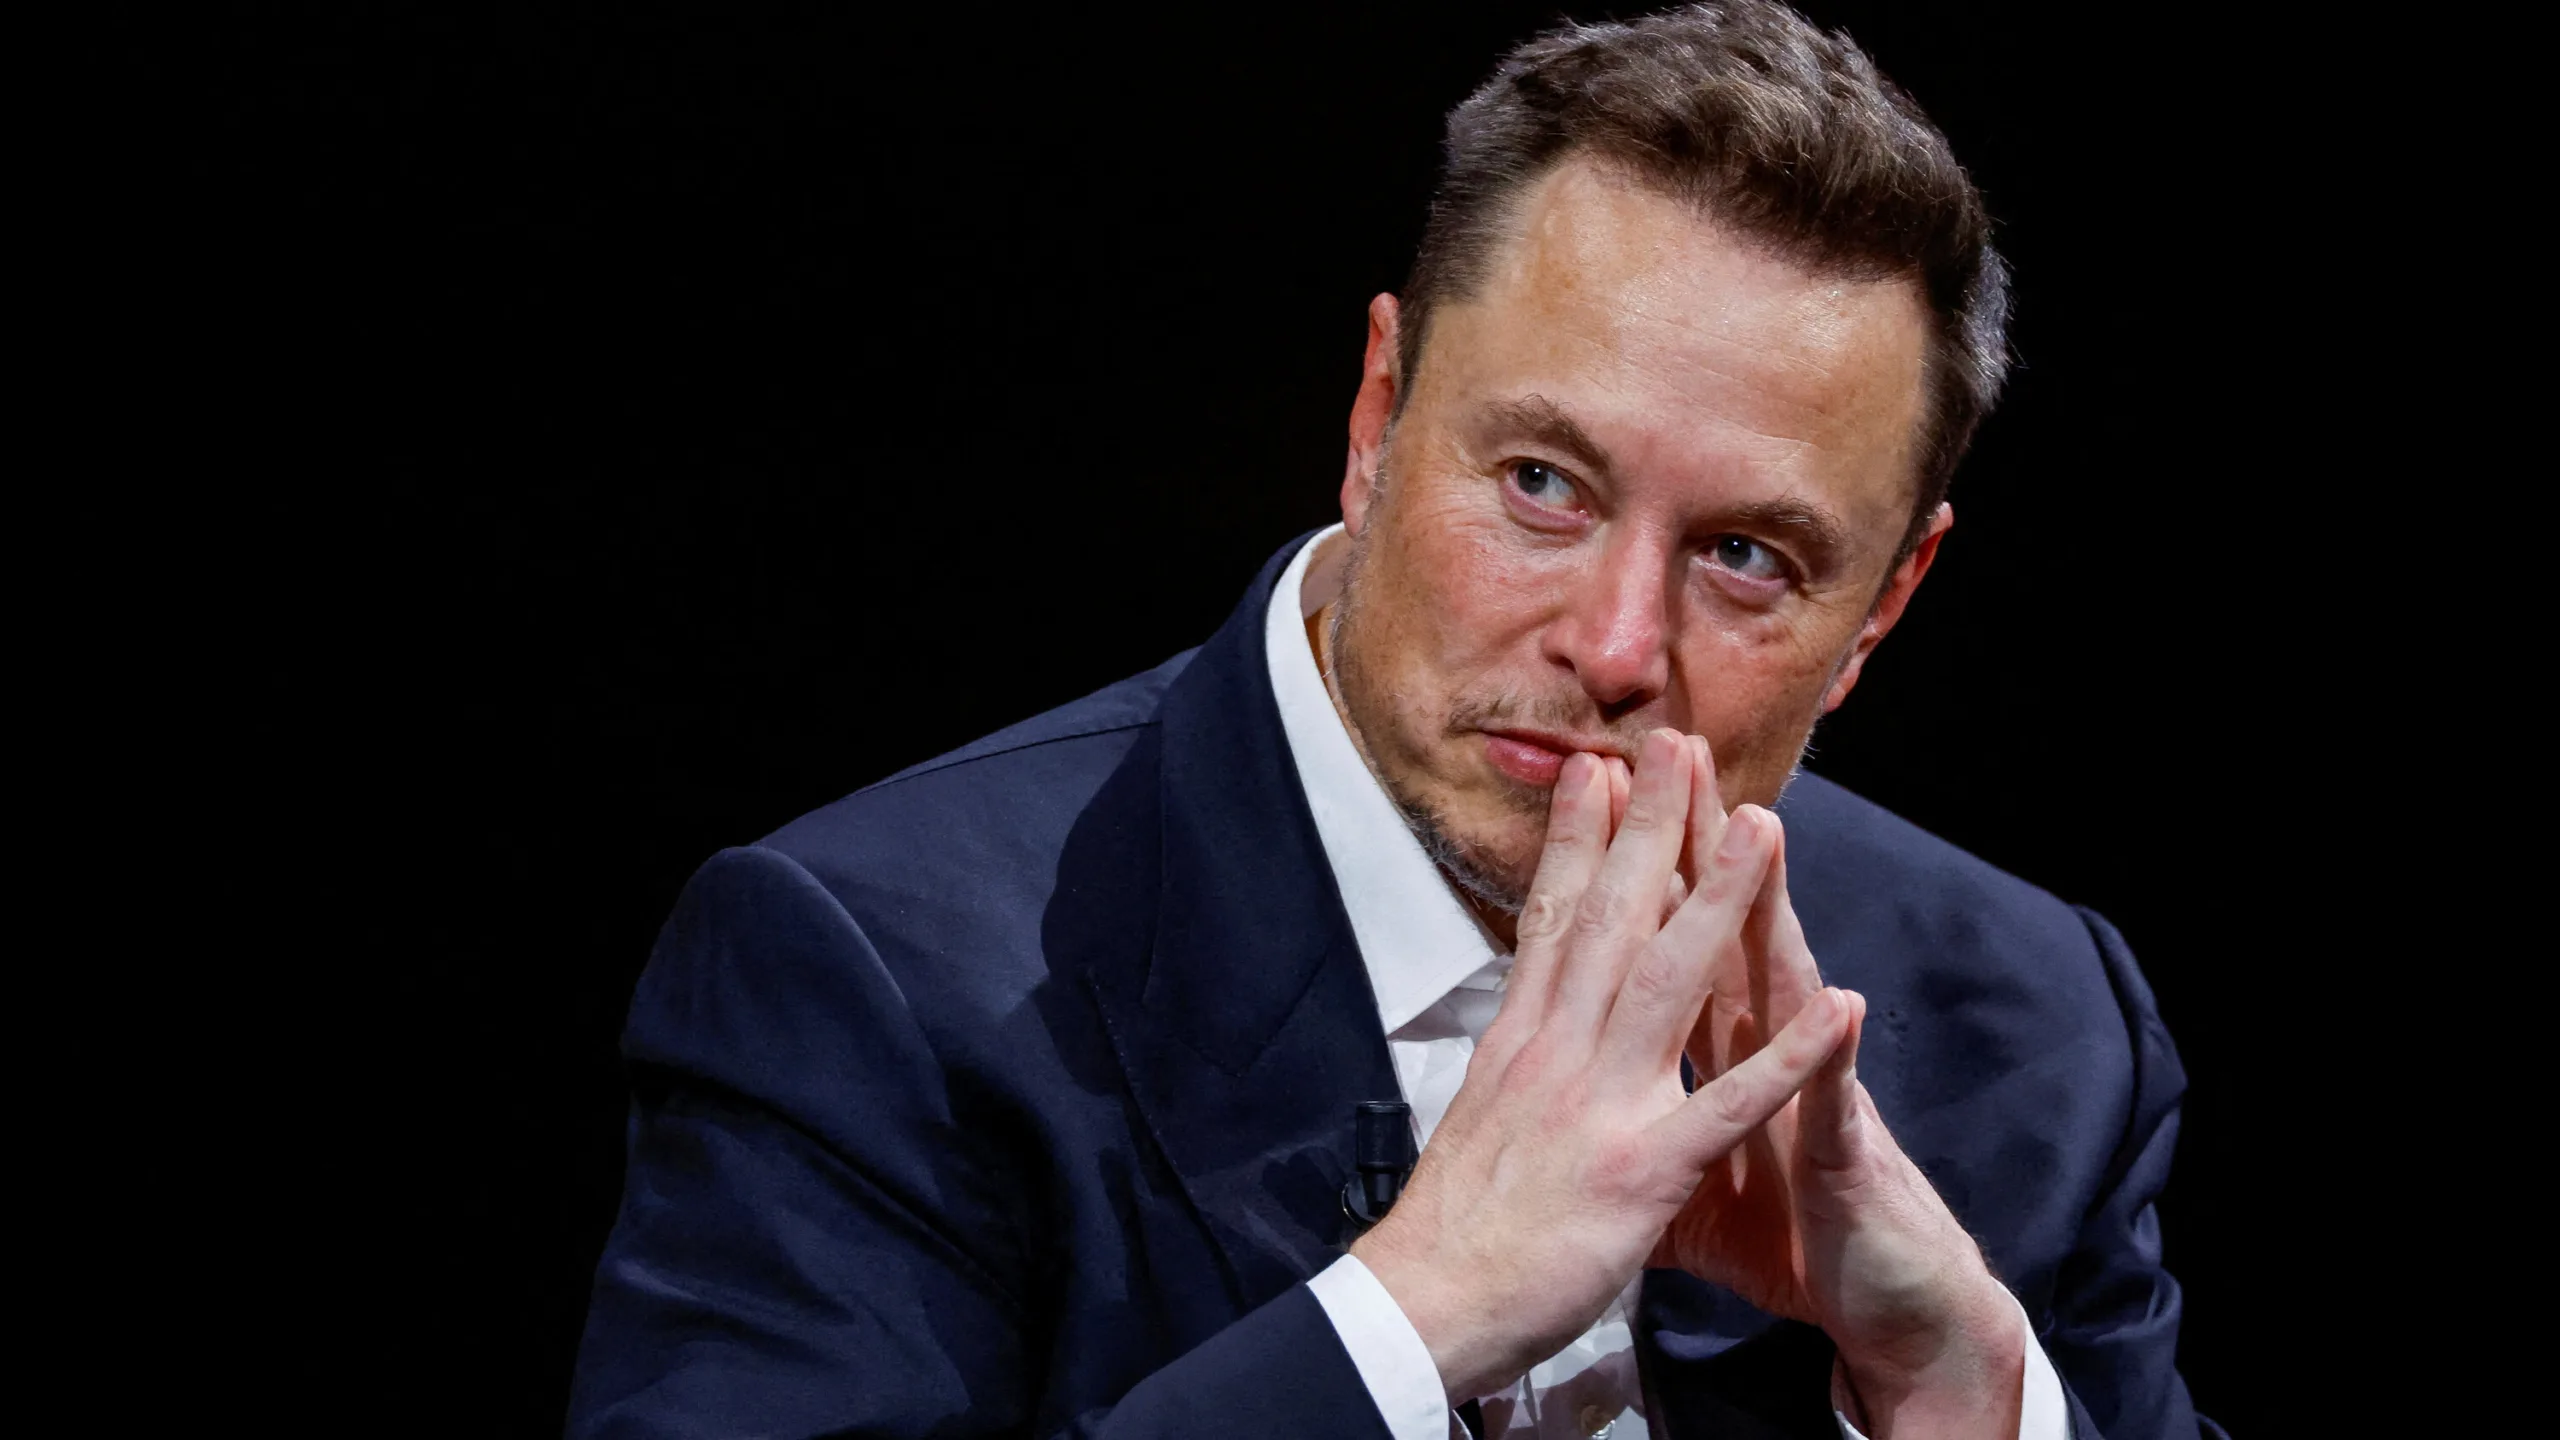 Top 10 Unexpected Facts About Elon Musk's Life and Work